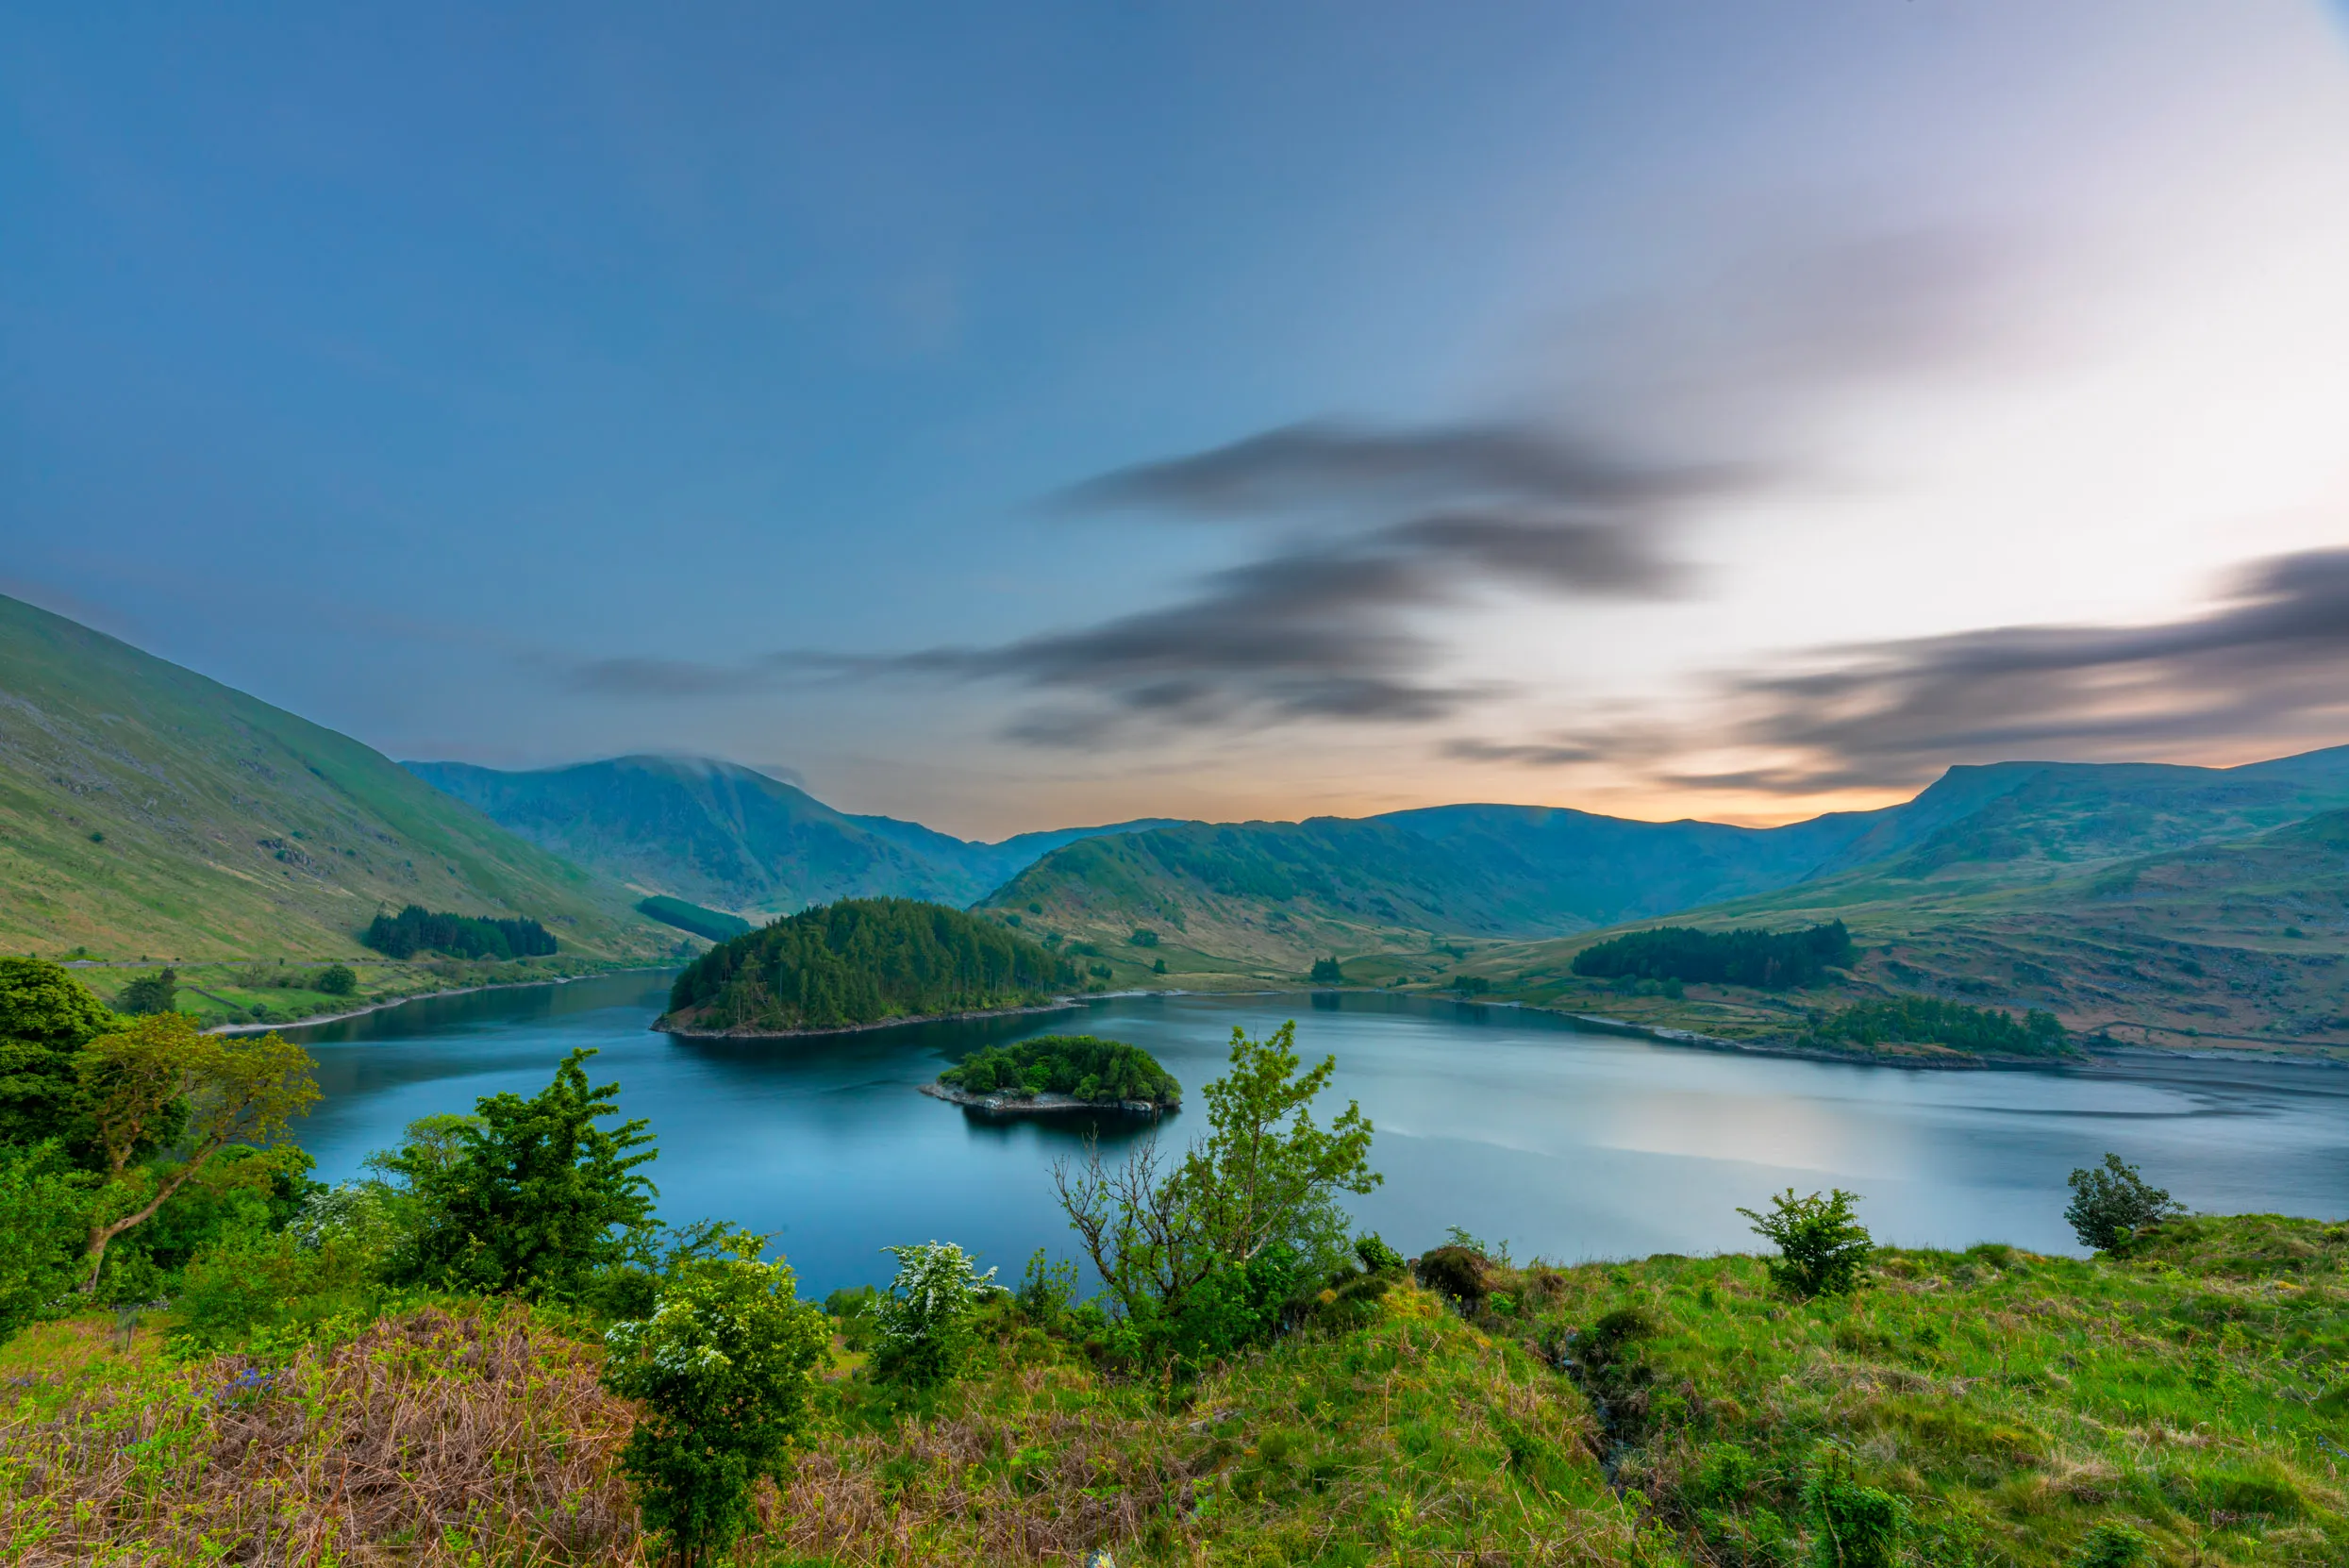 The sun setting over the main lake at Haweswater, creating a pink, orange tinge to the sky over grassy hills and islands that stand in the middle of the water.